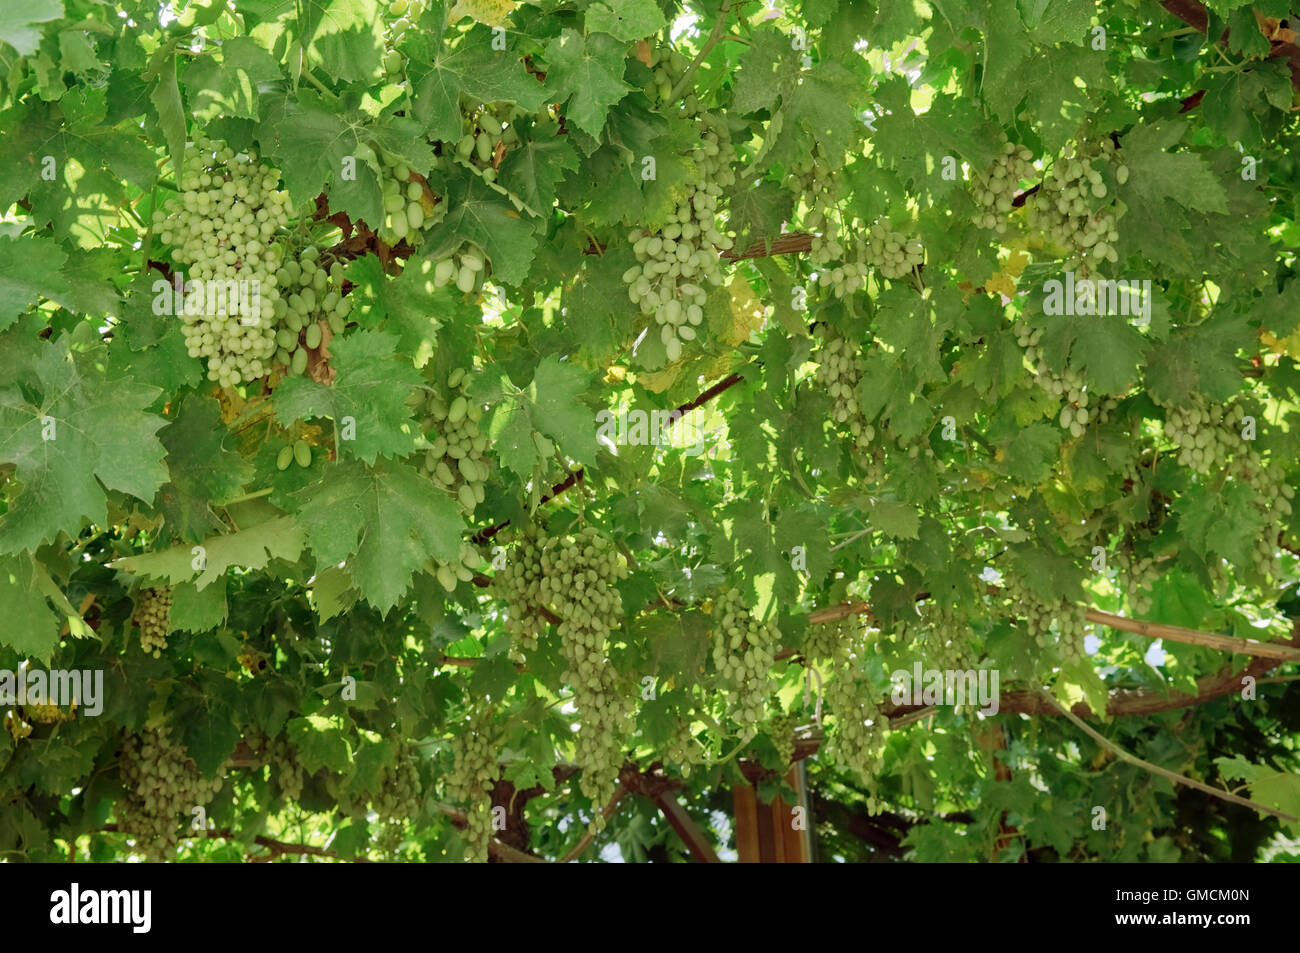 Bunch of grapes on the vine. Stock Photo